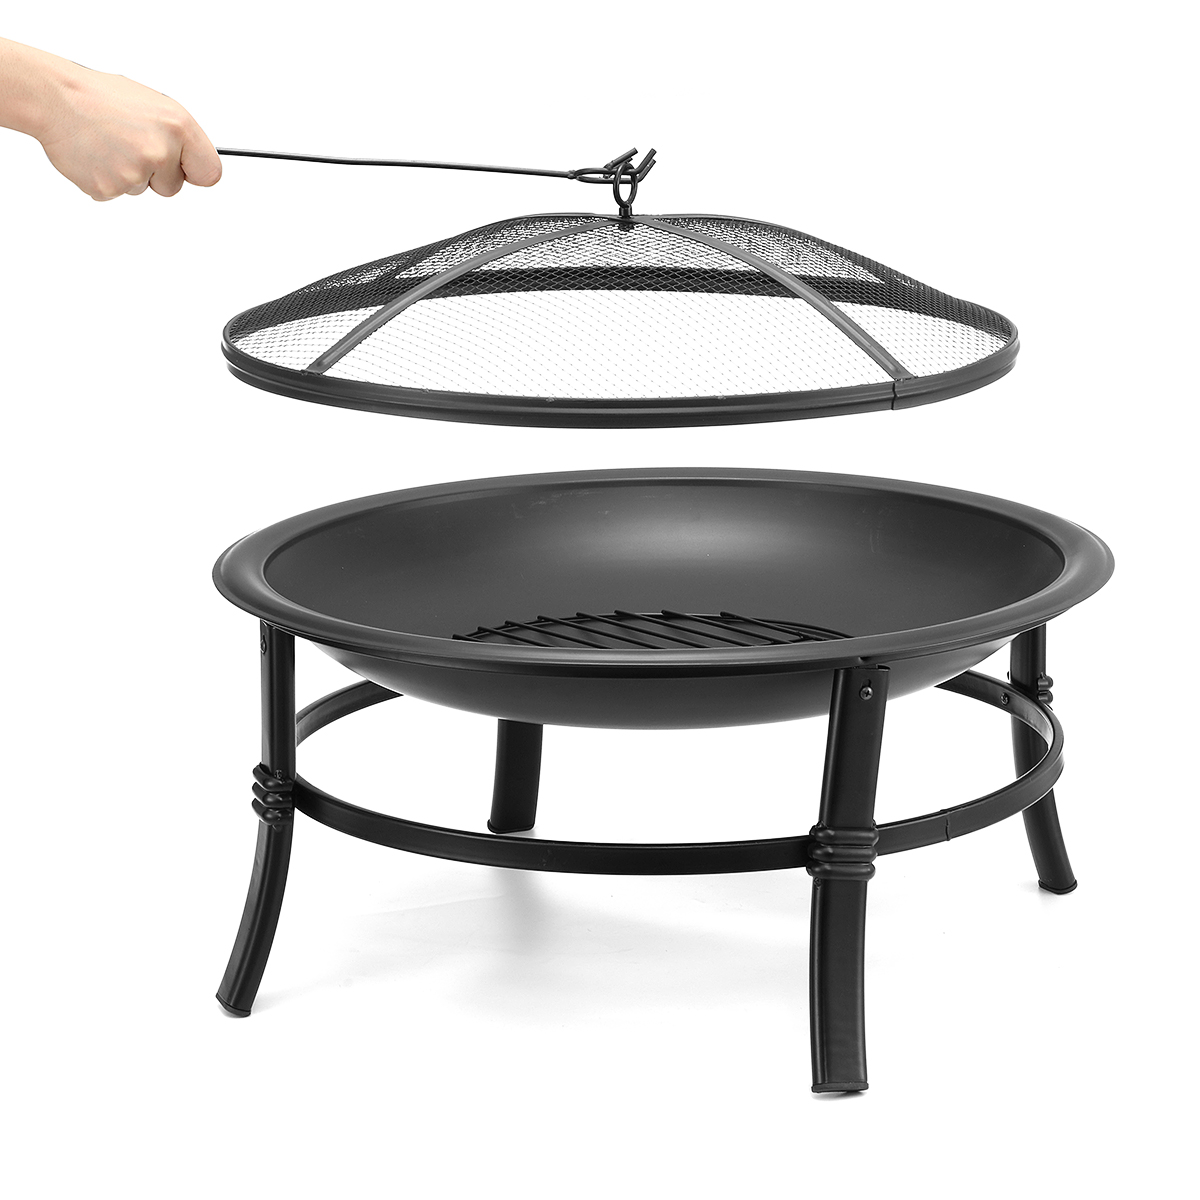 Kingso-26-inch-Fire-Pit-Wood-Burning--Small--Heavy-Duty-Steel-Firepit-with-Spark-Screen-Log-Grate-Po-1822387-8